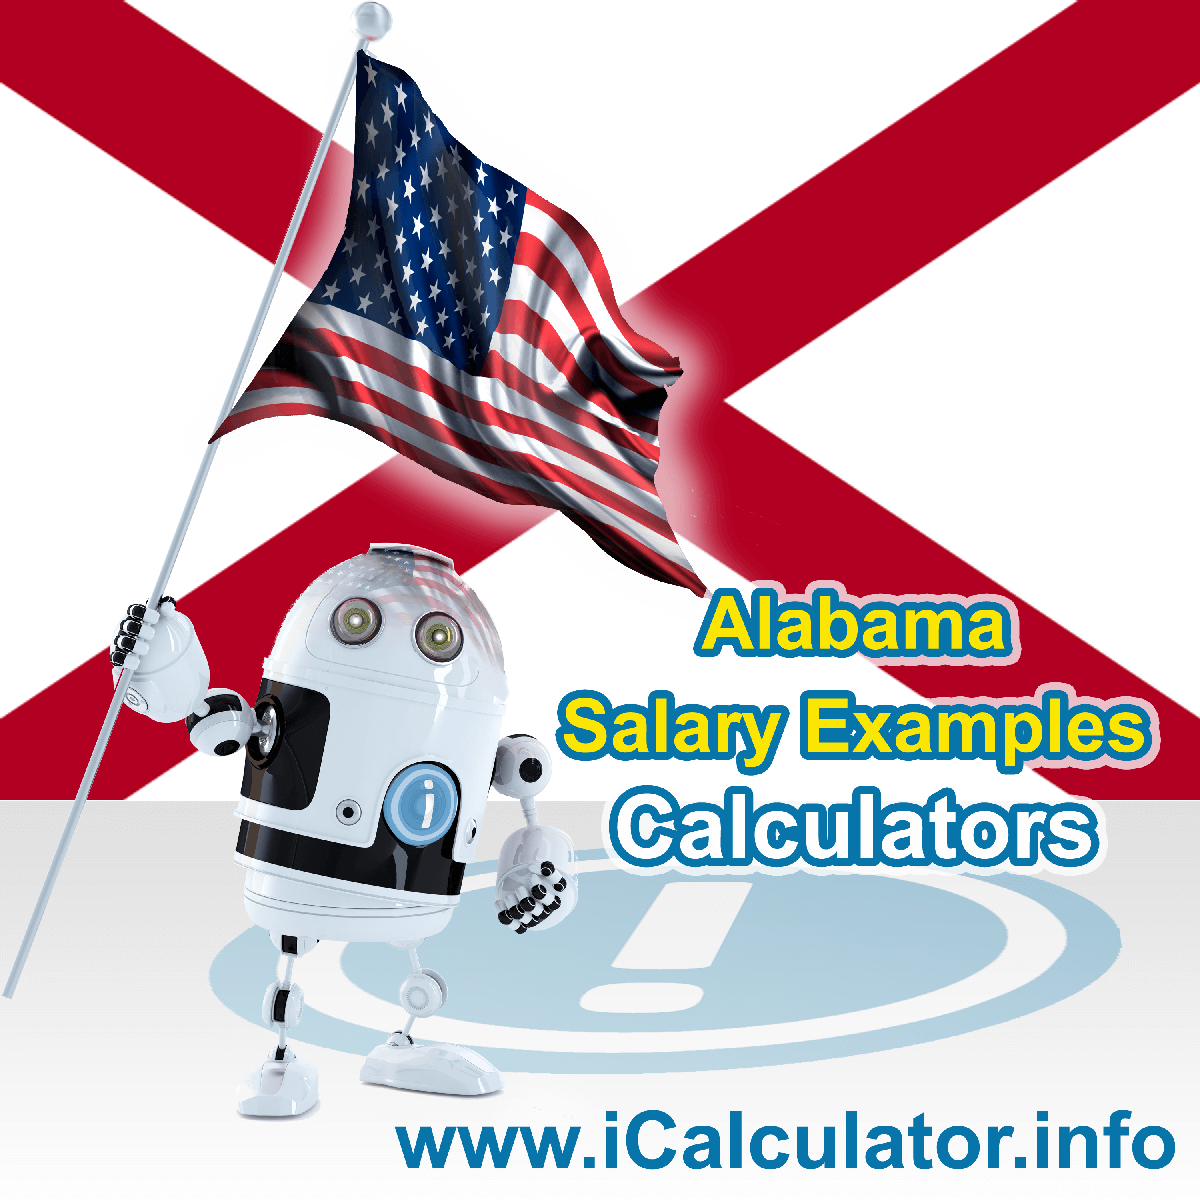 Alabama Salary Example for $ 20,000.00 in 2023 | iCalculator™ | $ 20,000.00 salary example for employee and employer paying Alabama State tincome taxes. Detailed salary after tax calculation including Alabama State Tax, Federal State Tax, Medicare Deductions, Social Security, Capital Gains and other income tax and salary deductions complete with supporting Alabama state tax tables 